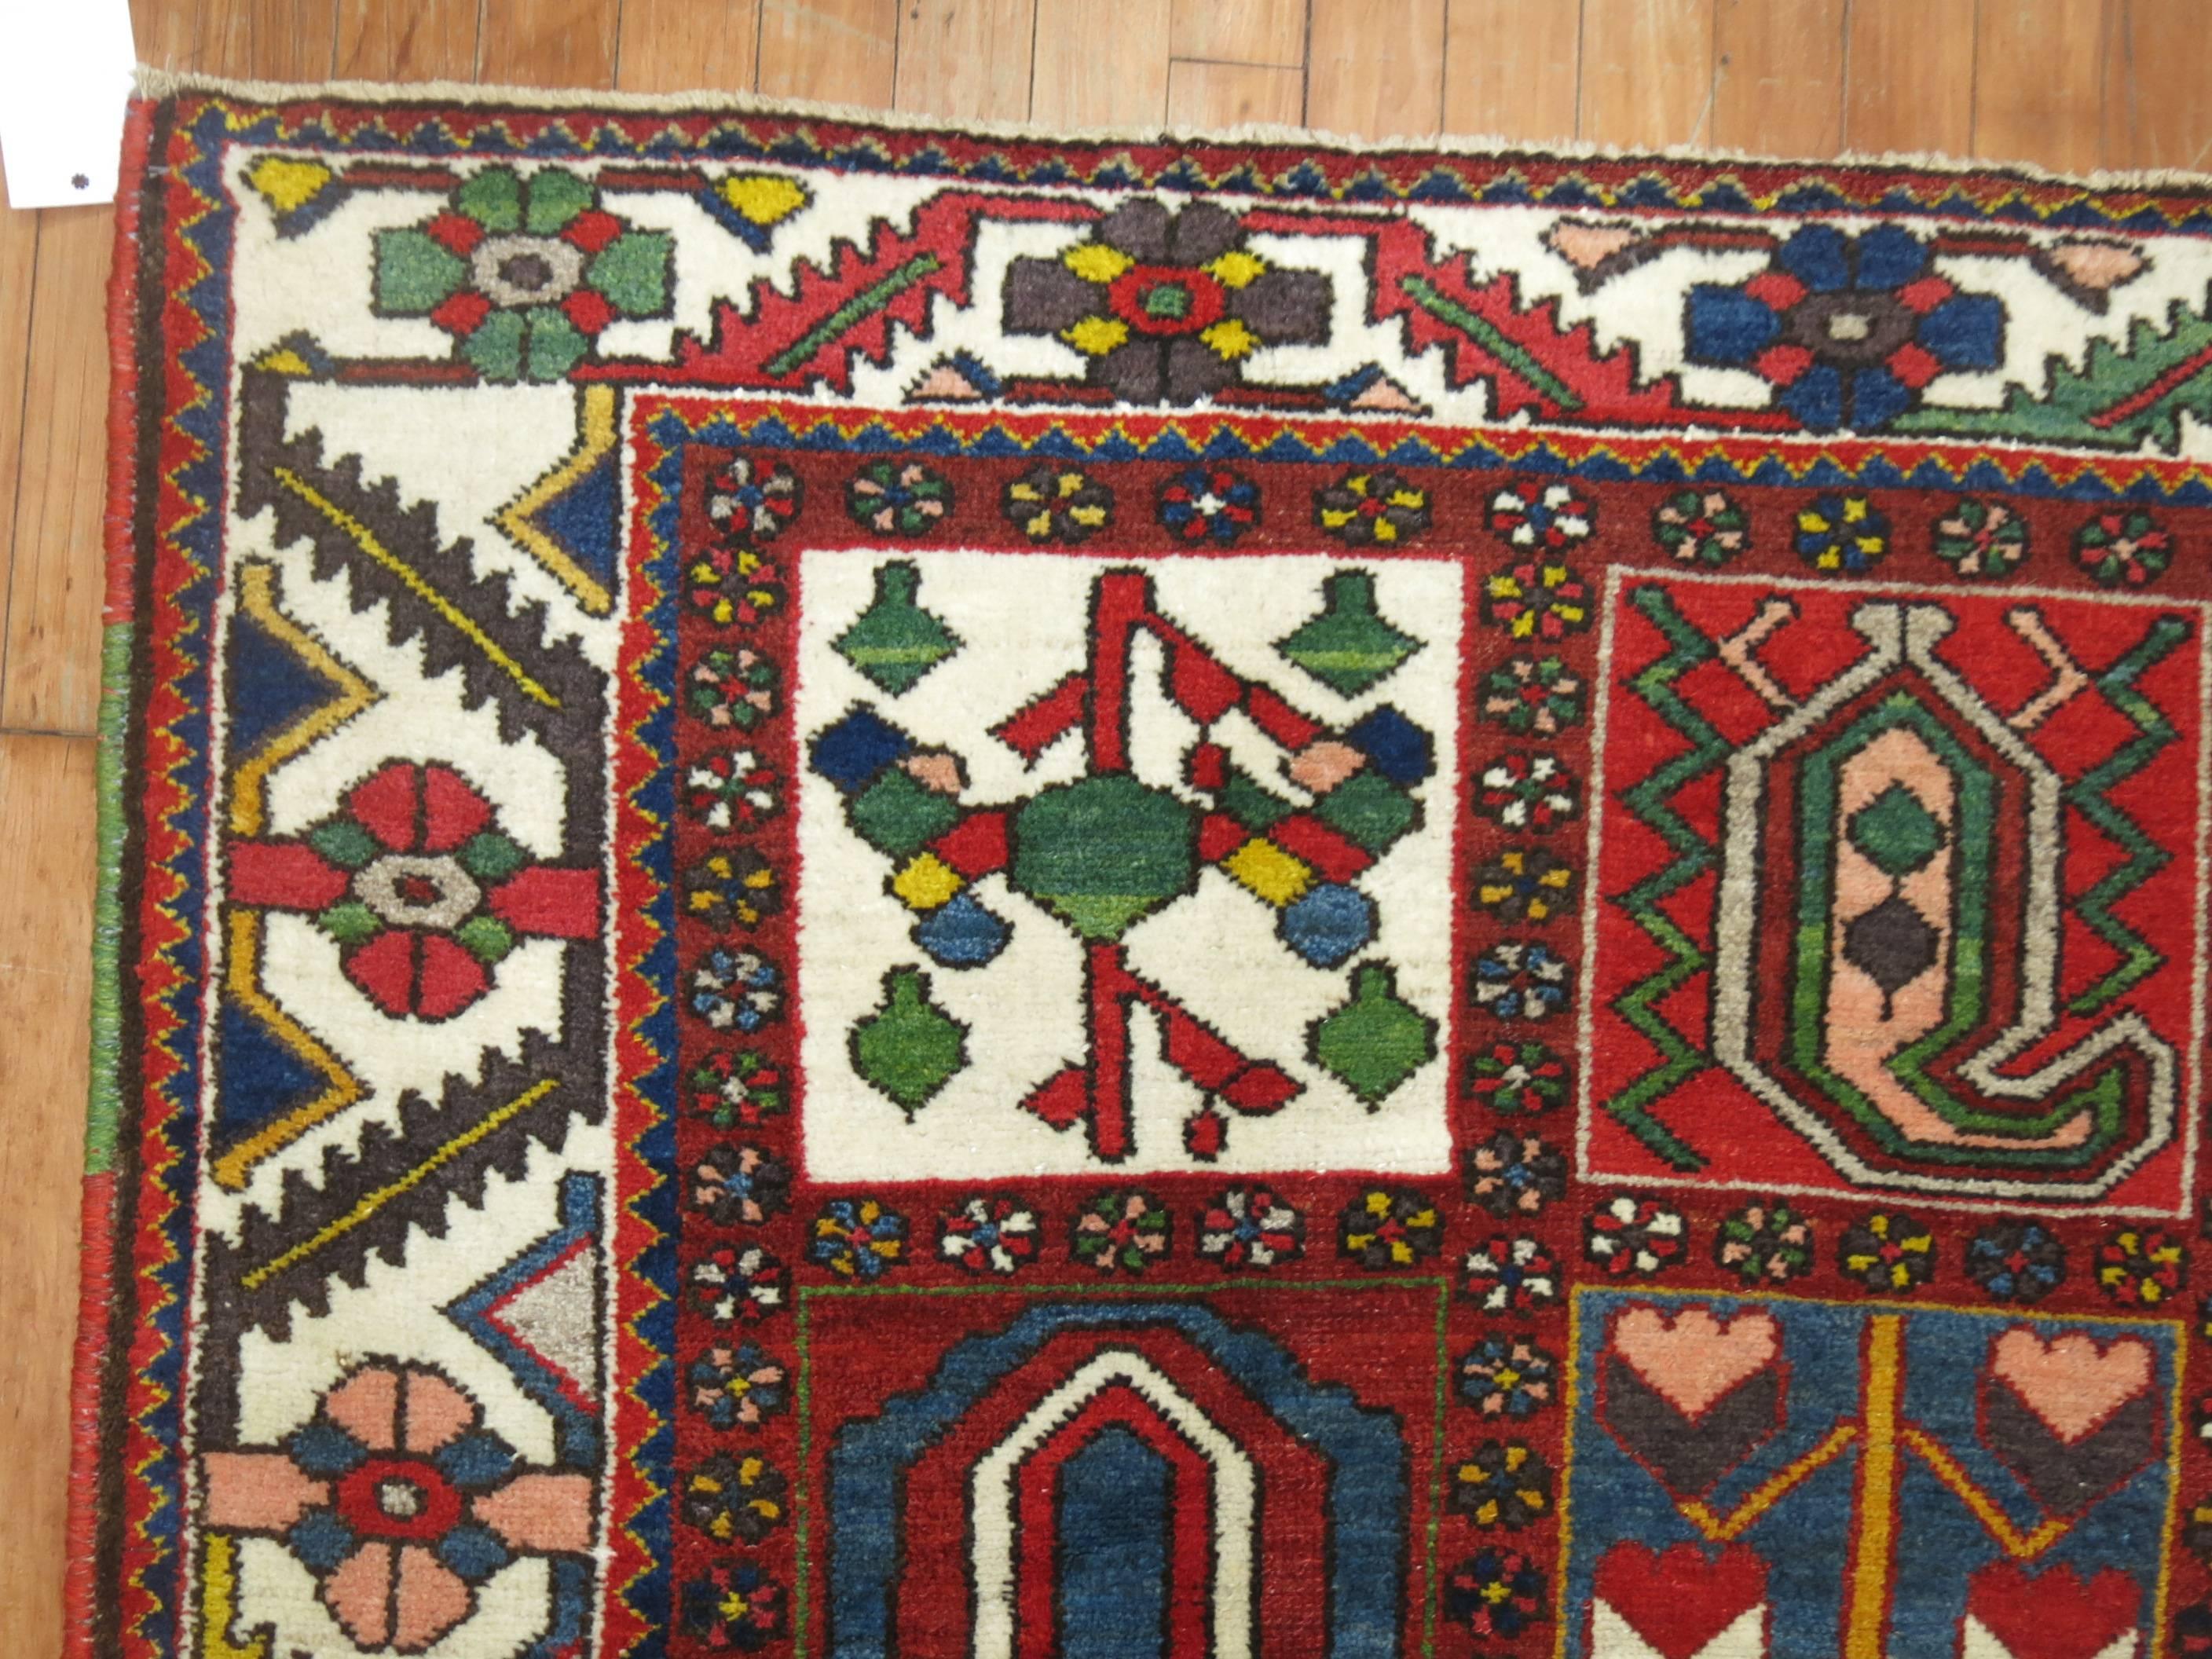 Colorful Persian Bakhtiari carpet with traditional panel design. The weaver added colorful salvage to each side too giving it an added characteristic.

4'7'' x 7'2''